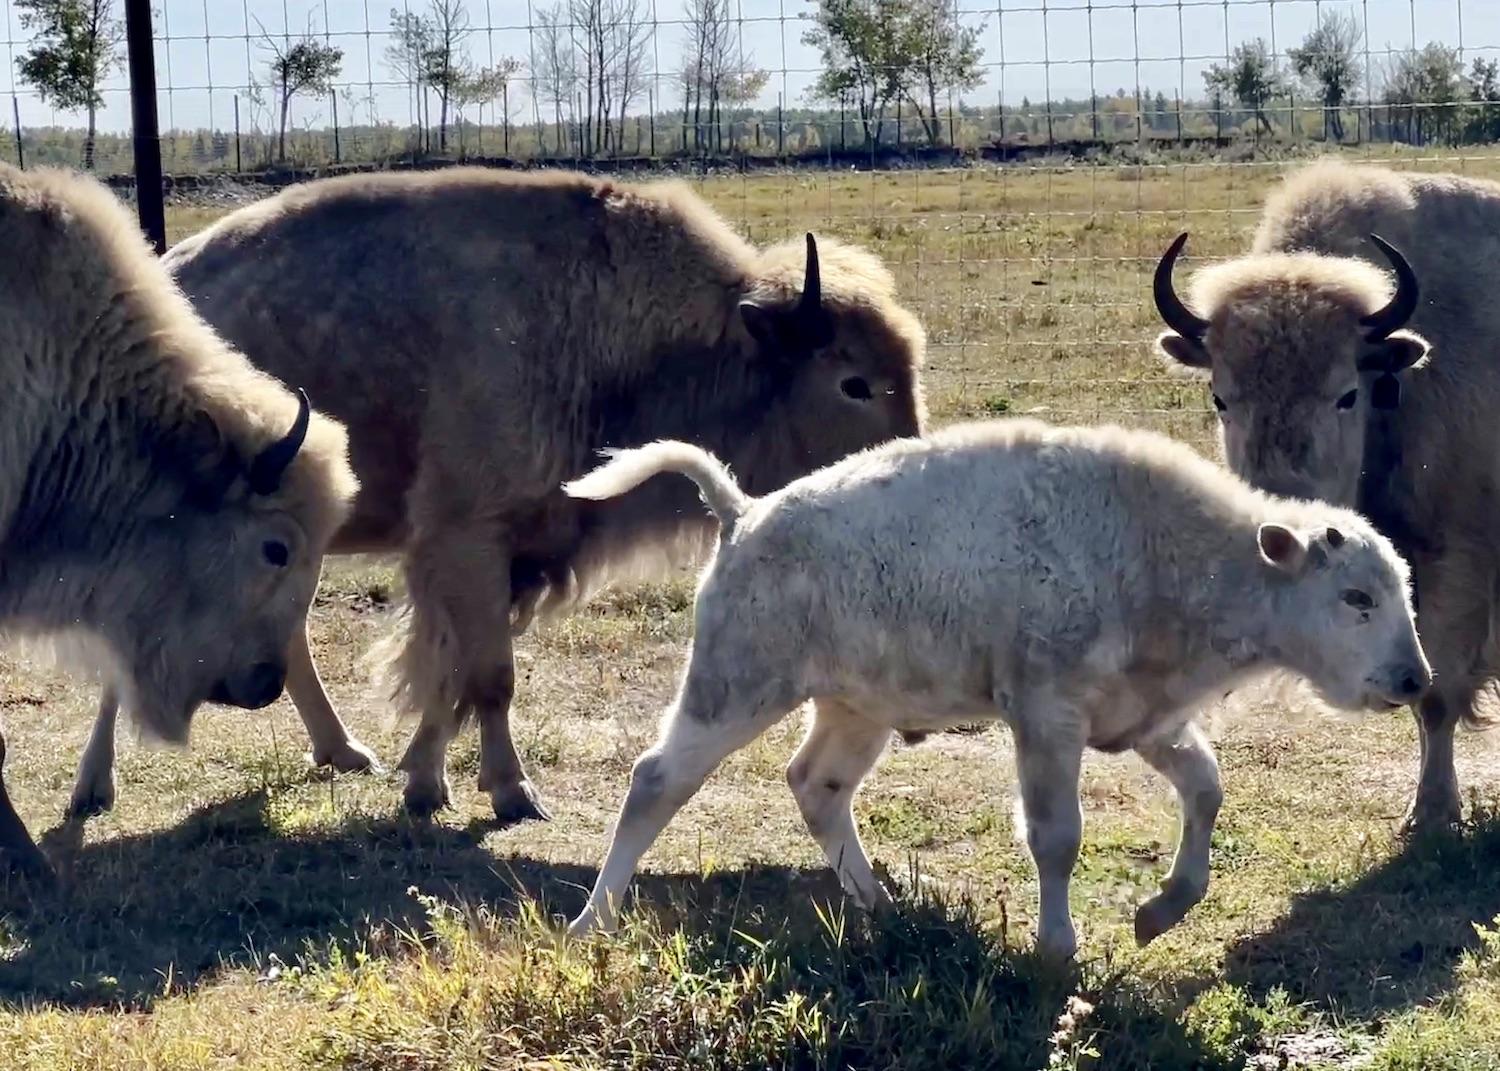 Some of the white bison herd at Visions, Hopes and Dreams at Métis Crossing Wildlife Park.